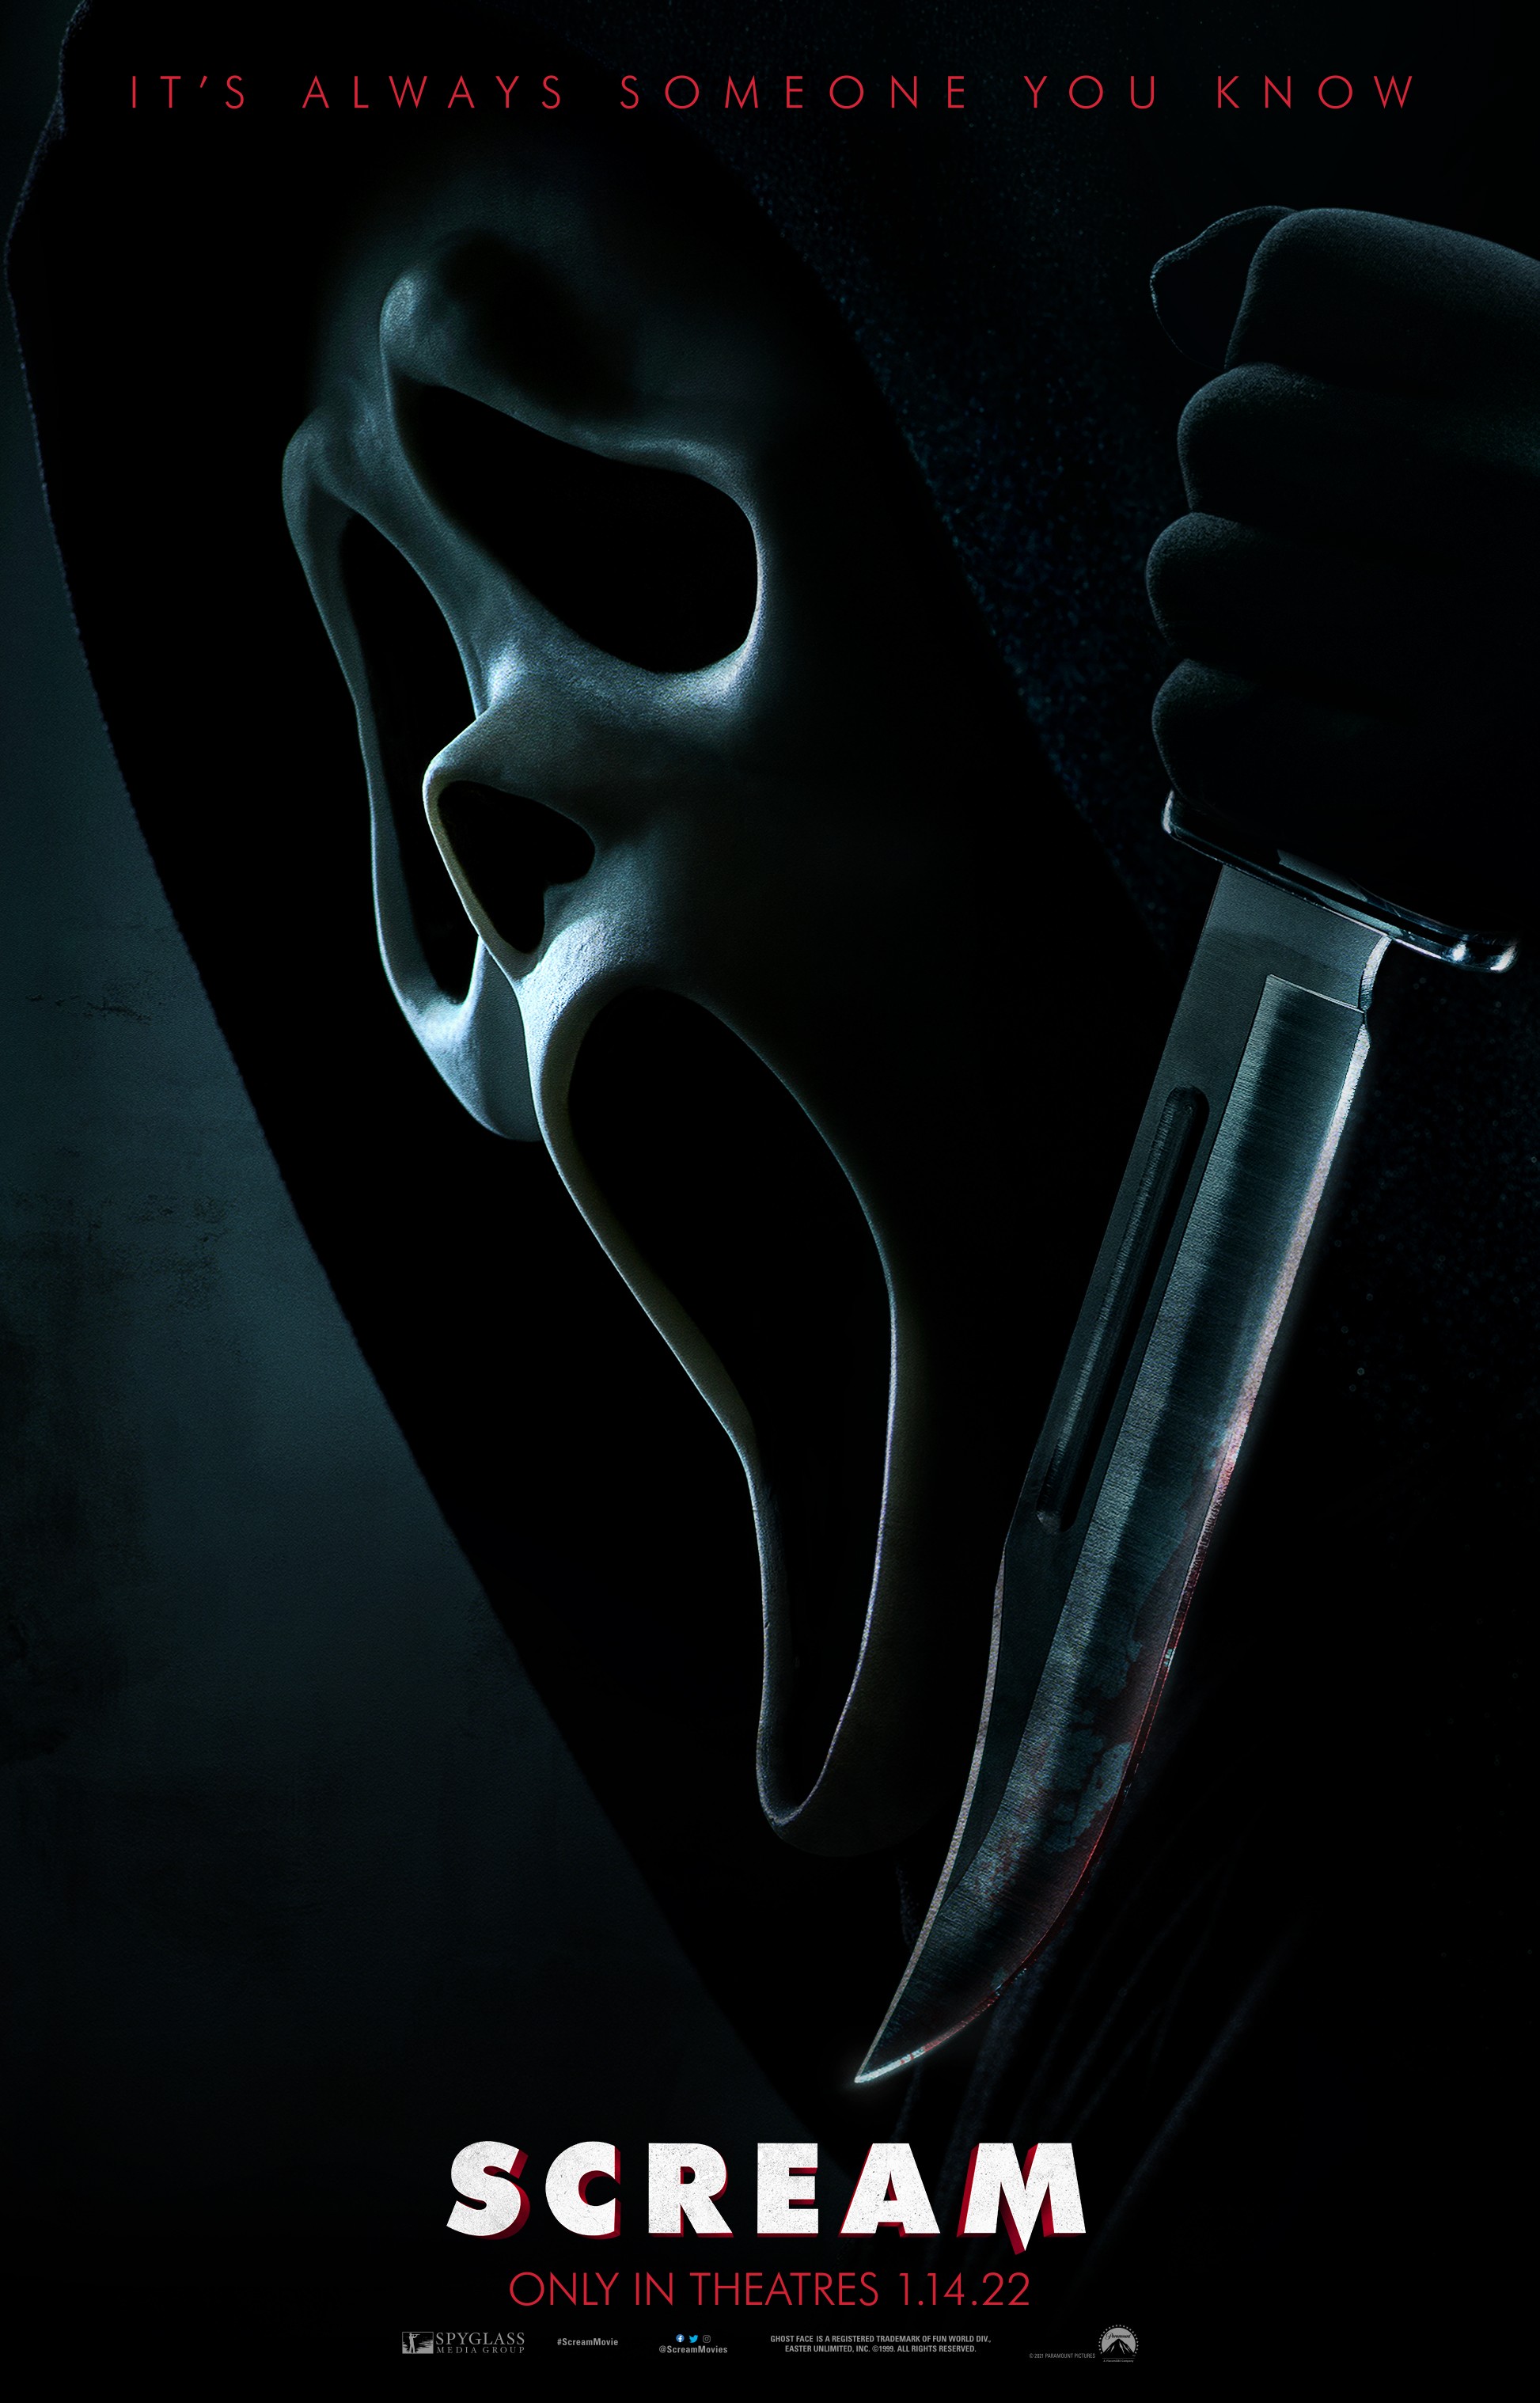 Scream': All 6 movies ranked by Rotten Tomatoes